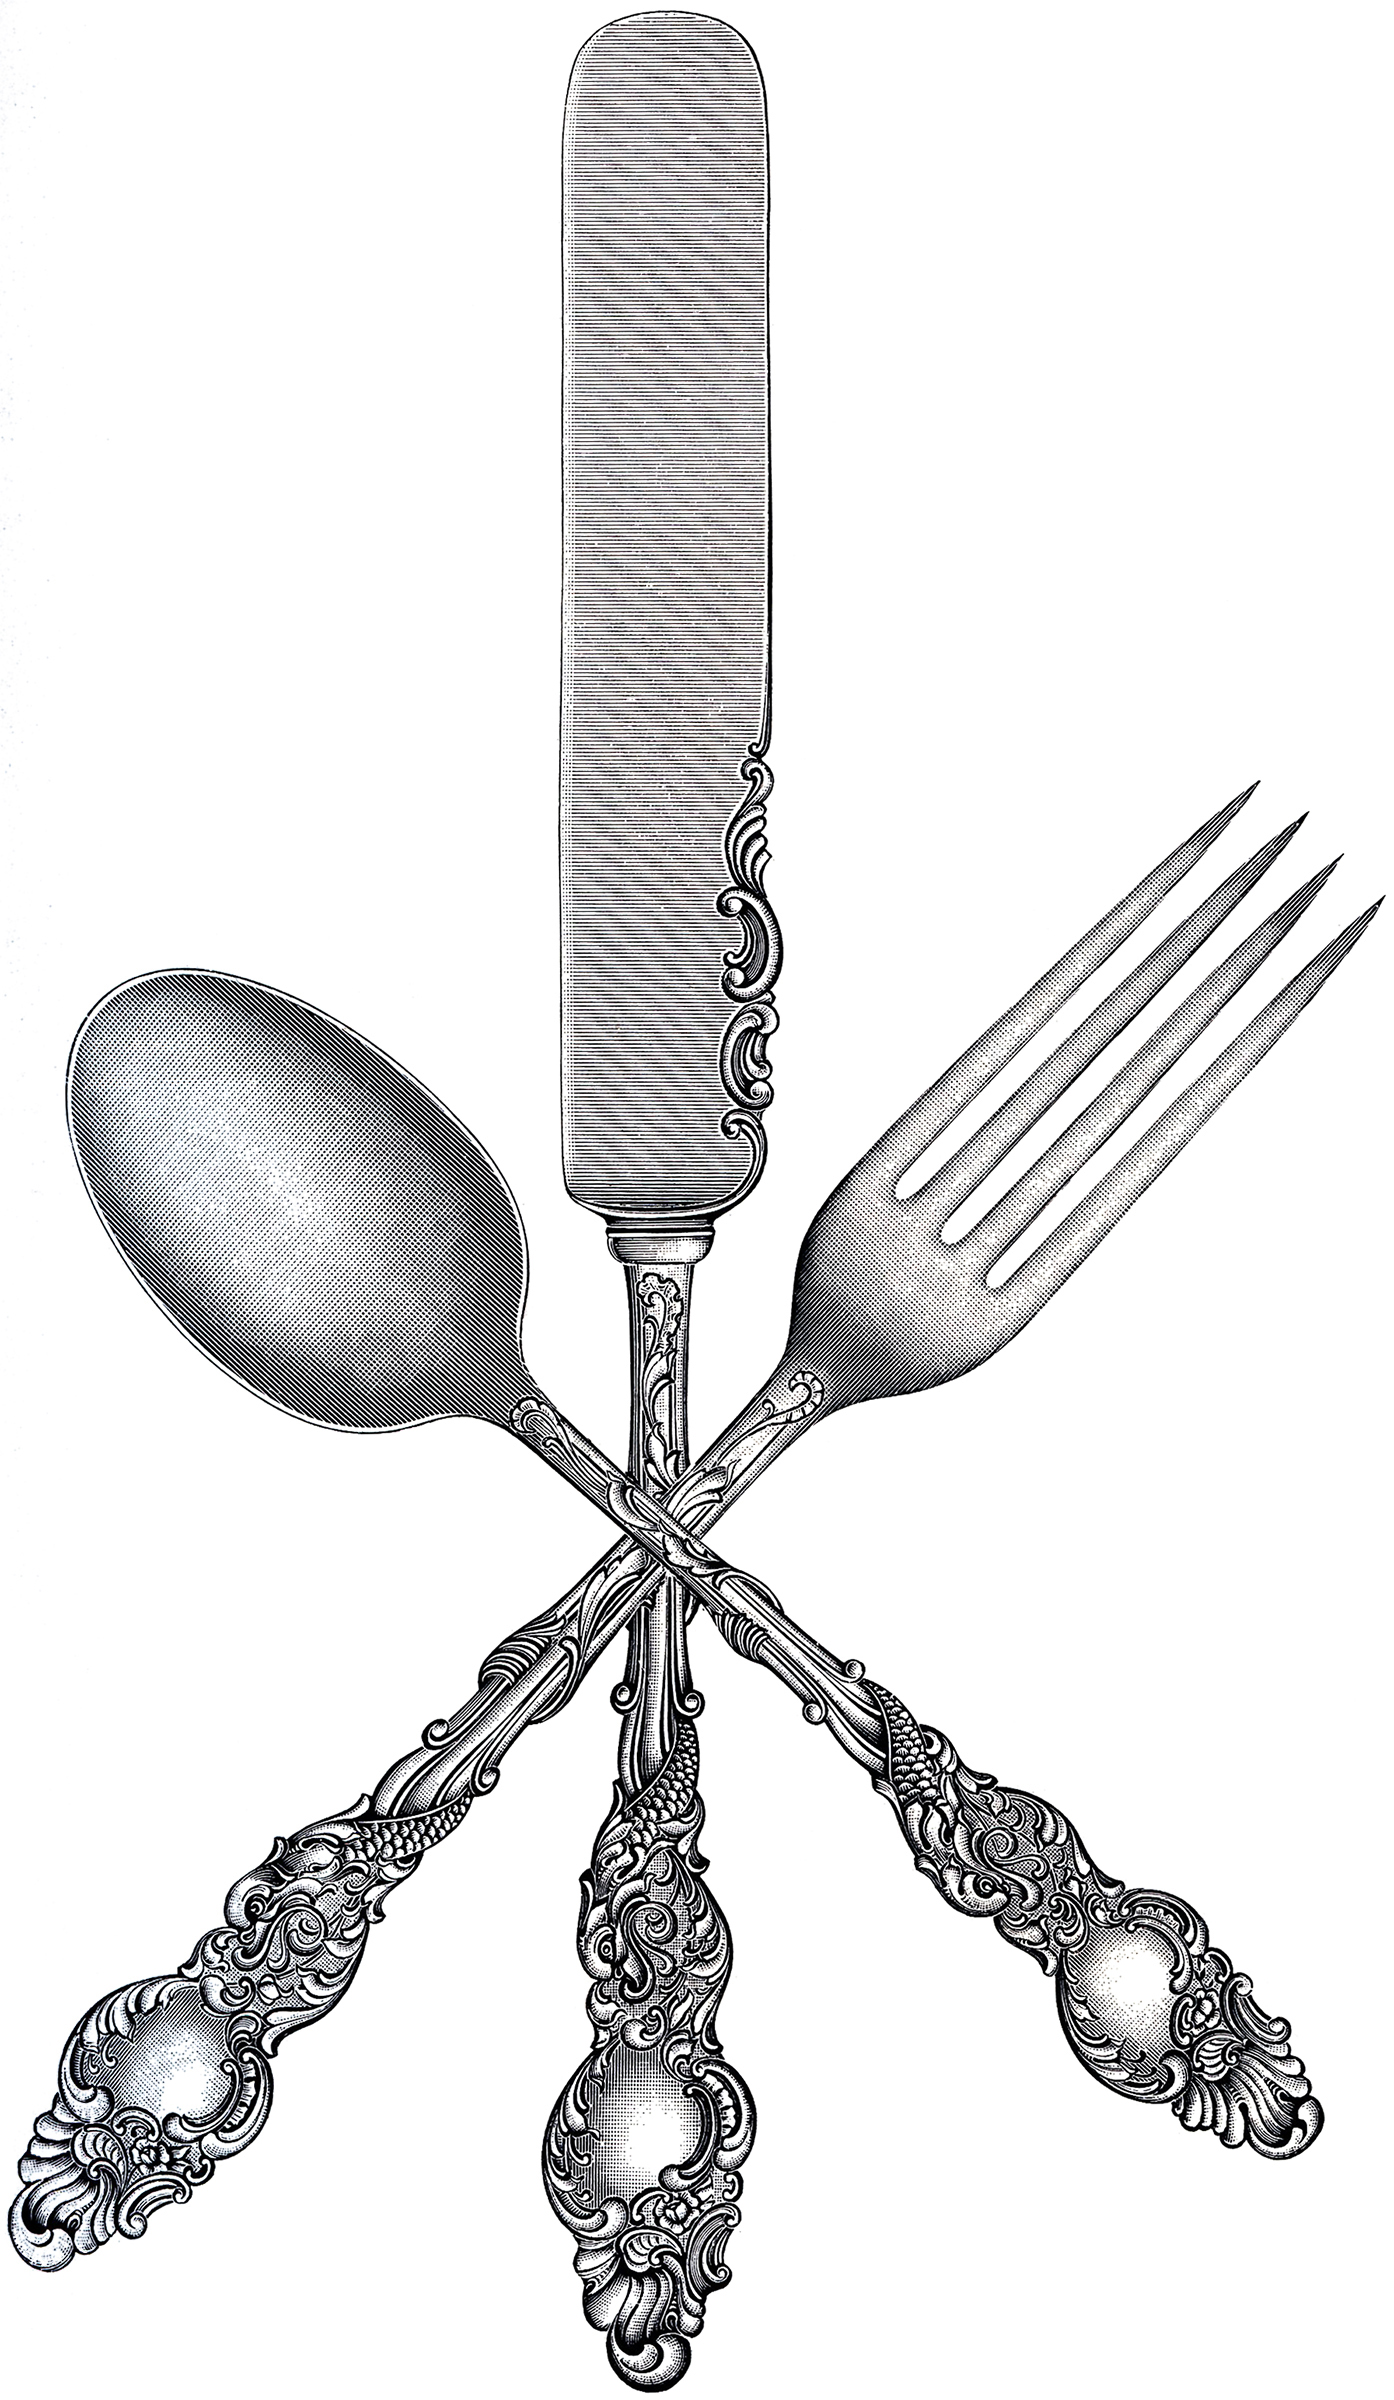 Free Fork Spoon Knife Clip Art - The Graphics Fairy